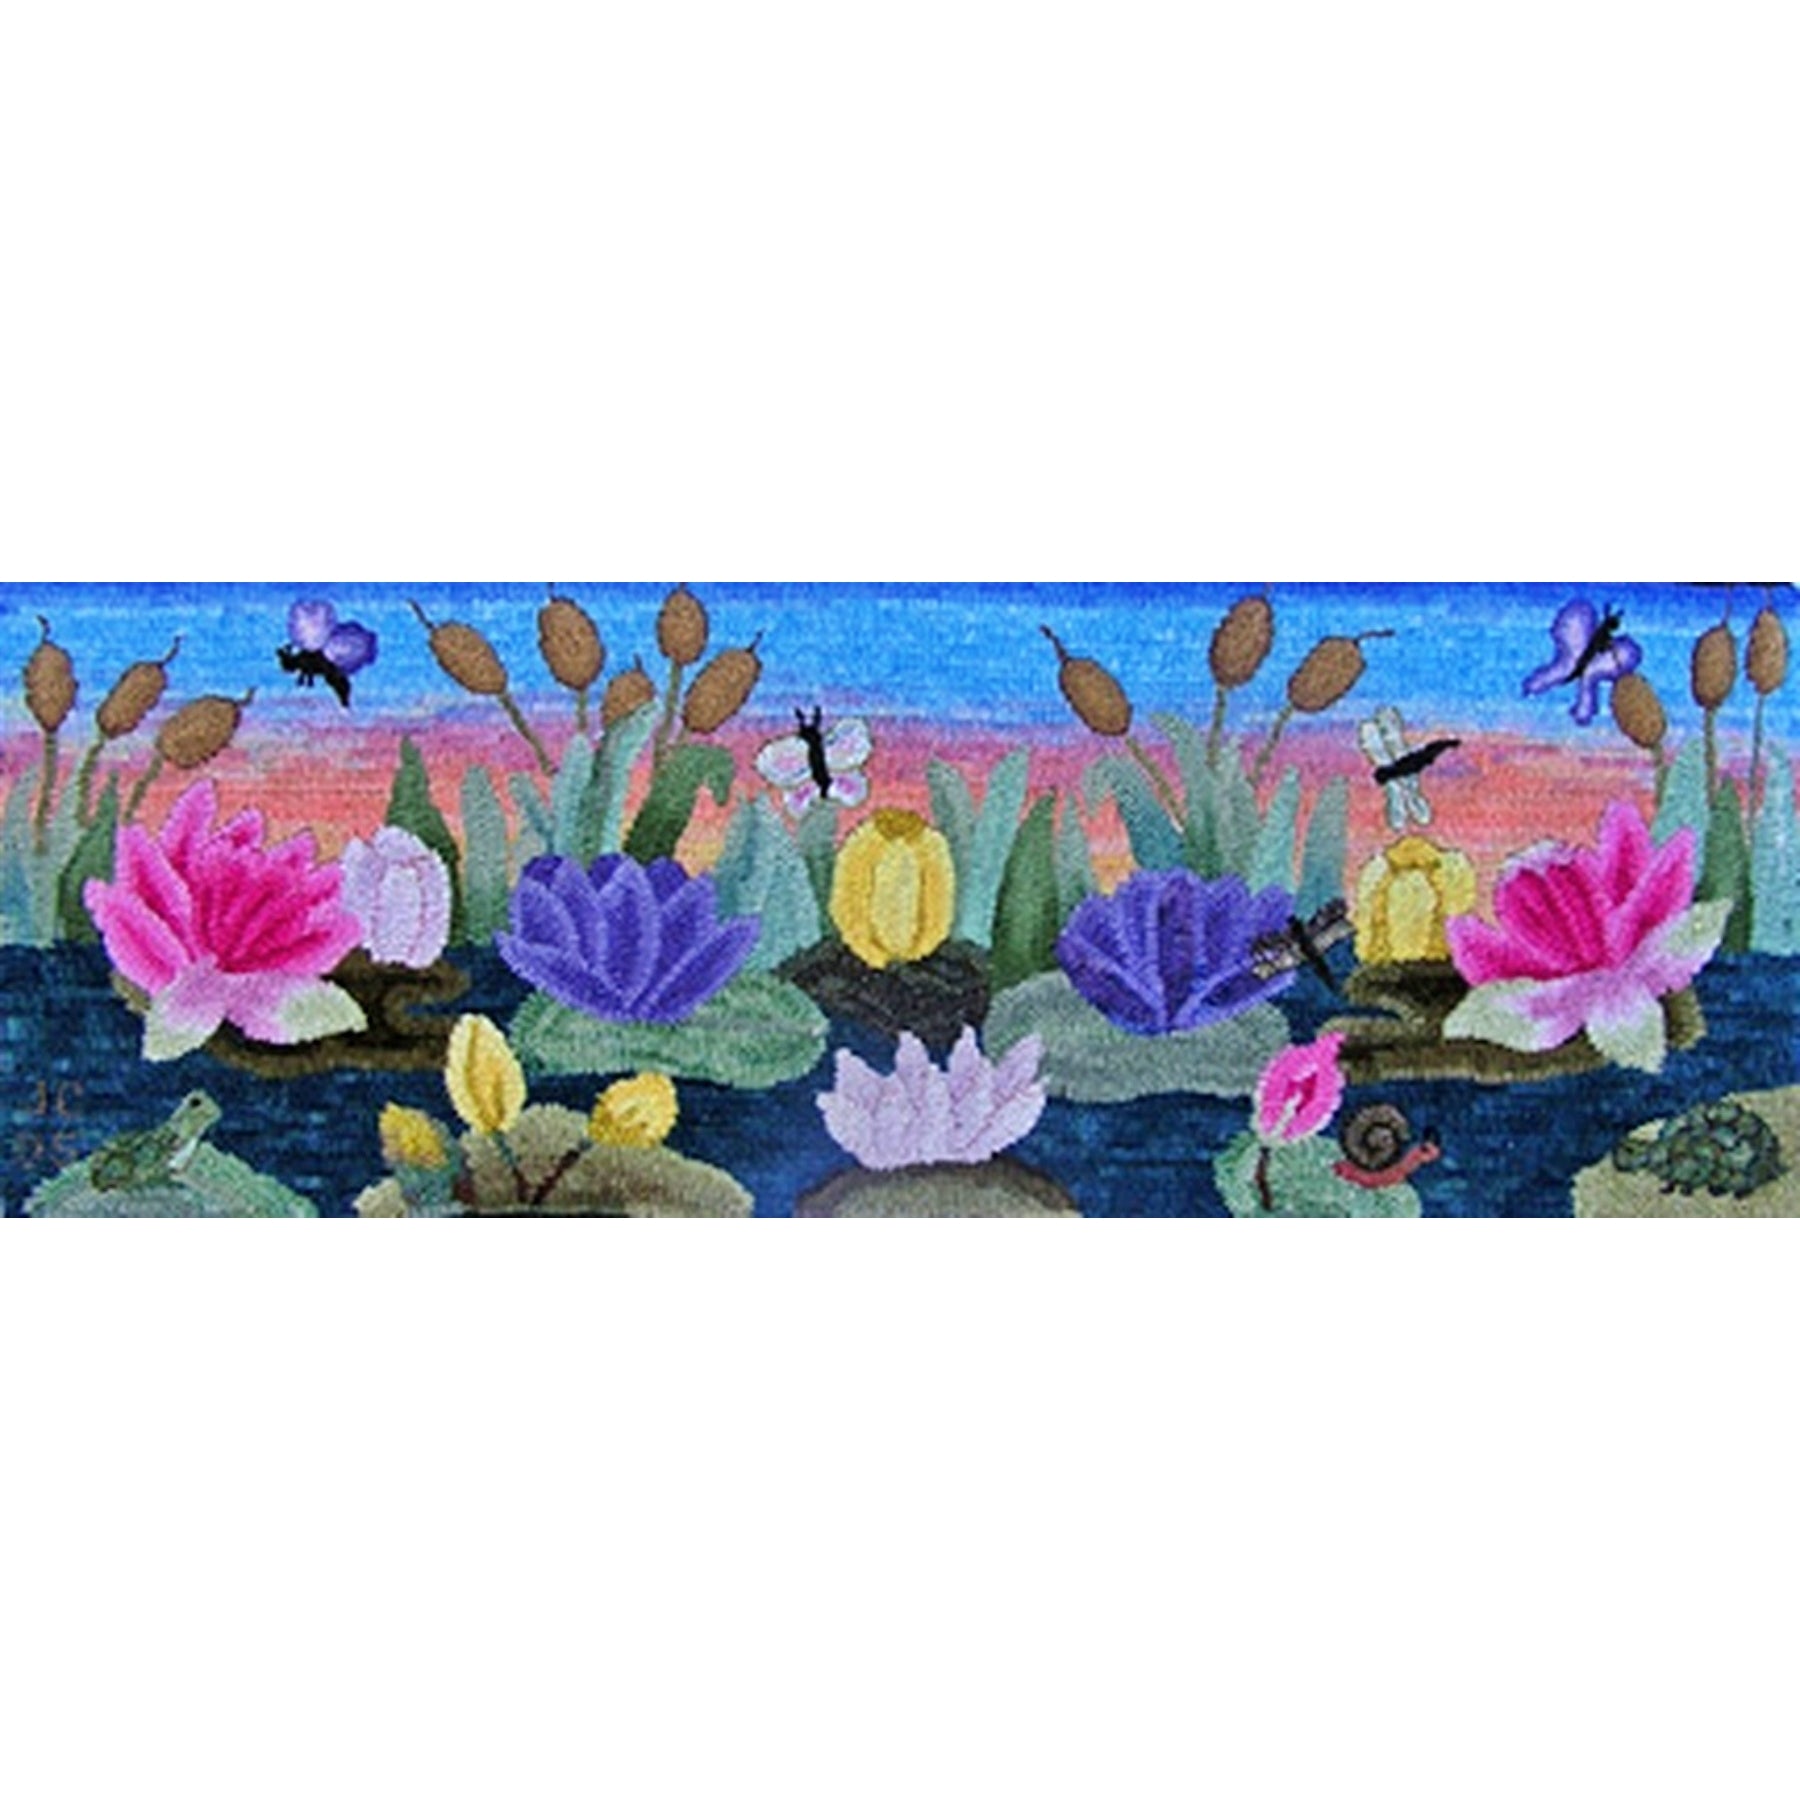 Lillies Of The Pond - Narrow, rug hooked by Judy Carter